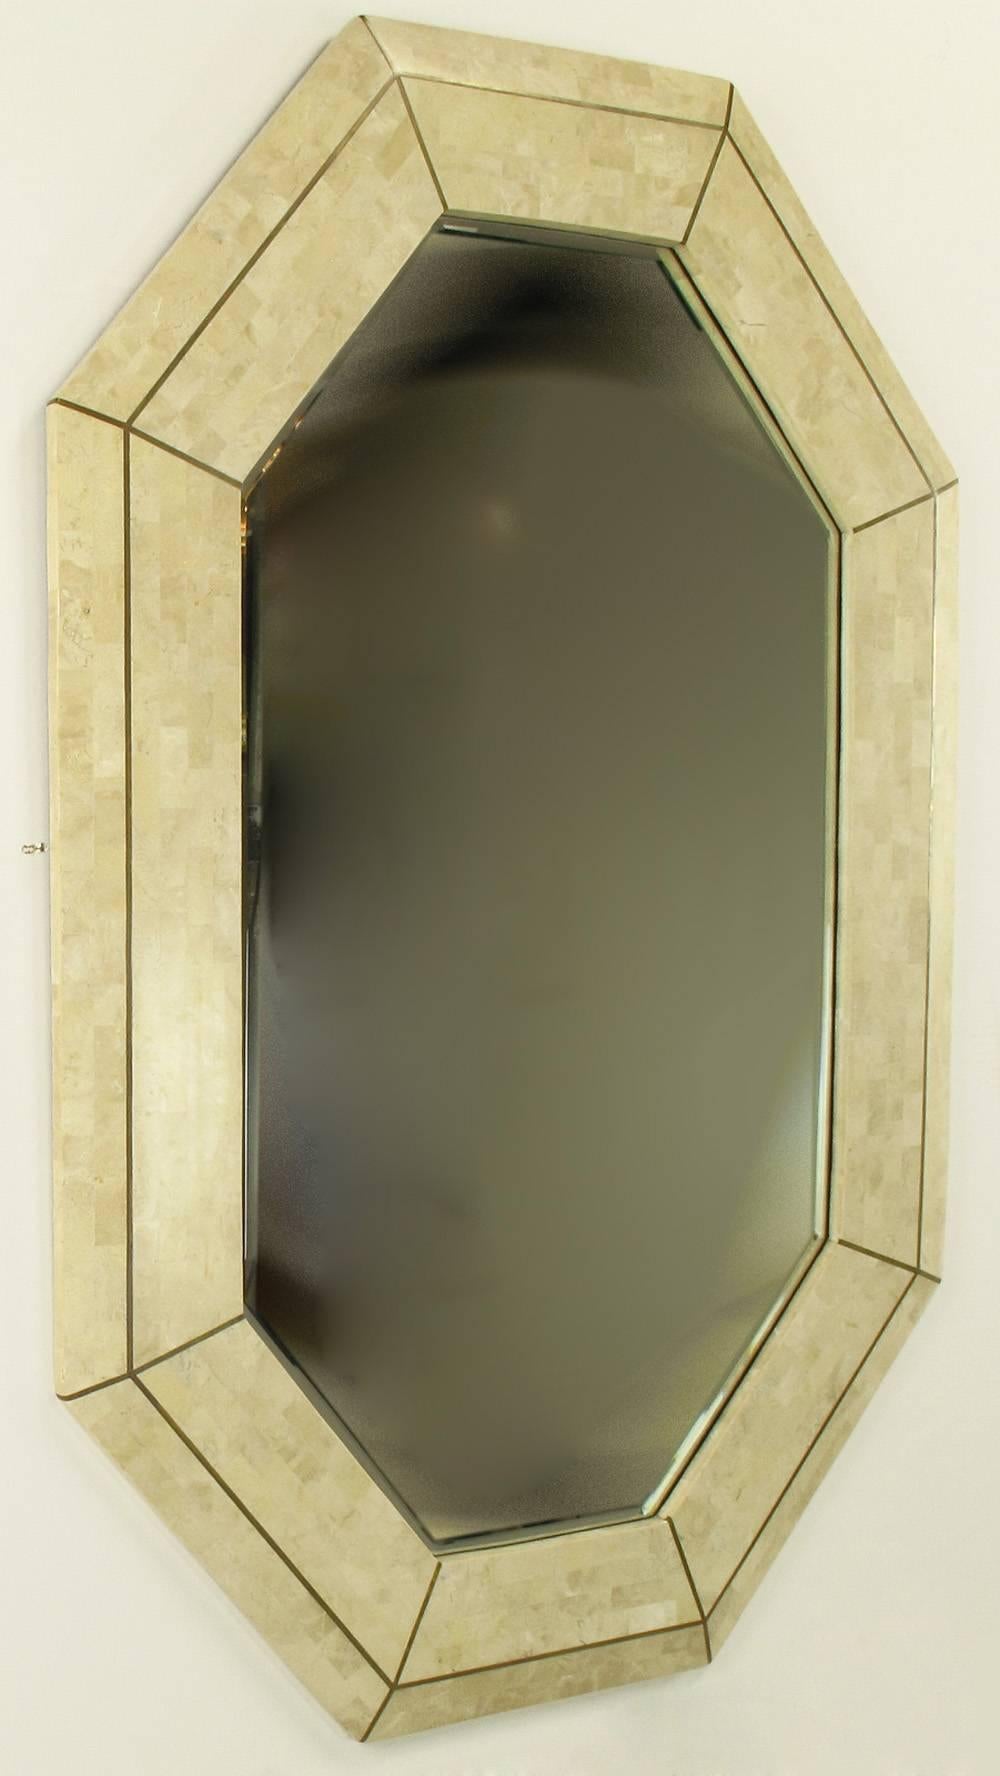 Tessellated fossil stone and inlaid brass mirror by Maitland-Smith. Octagonal shape frame is beveled and one inch thick. Mirror is also beveled. Manufactured i the Philippines at the same factory as the similar pieces by Karl Springer and Robert